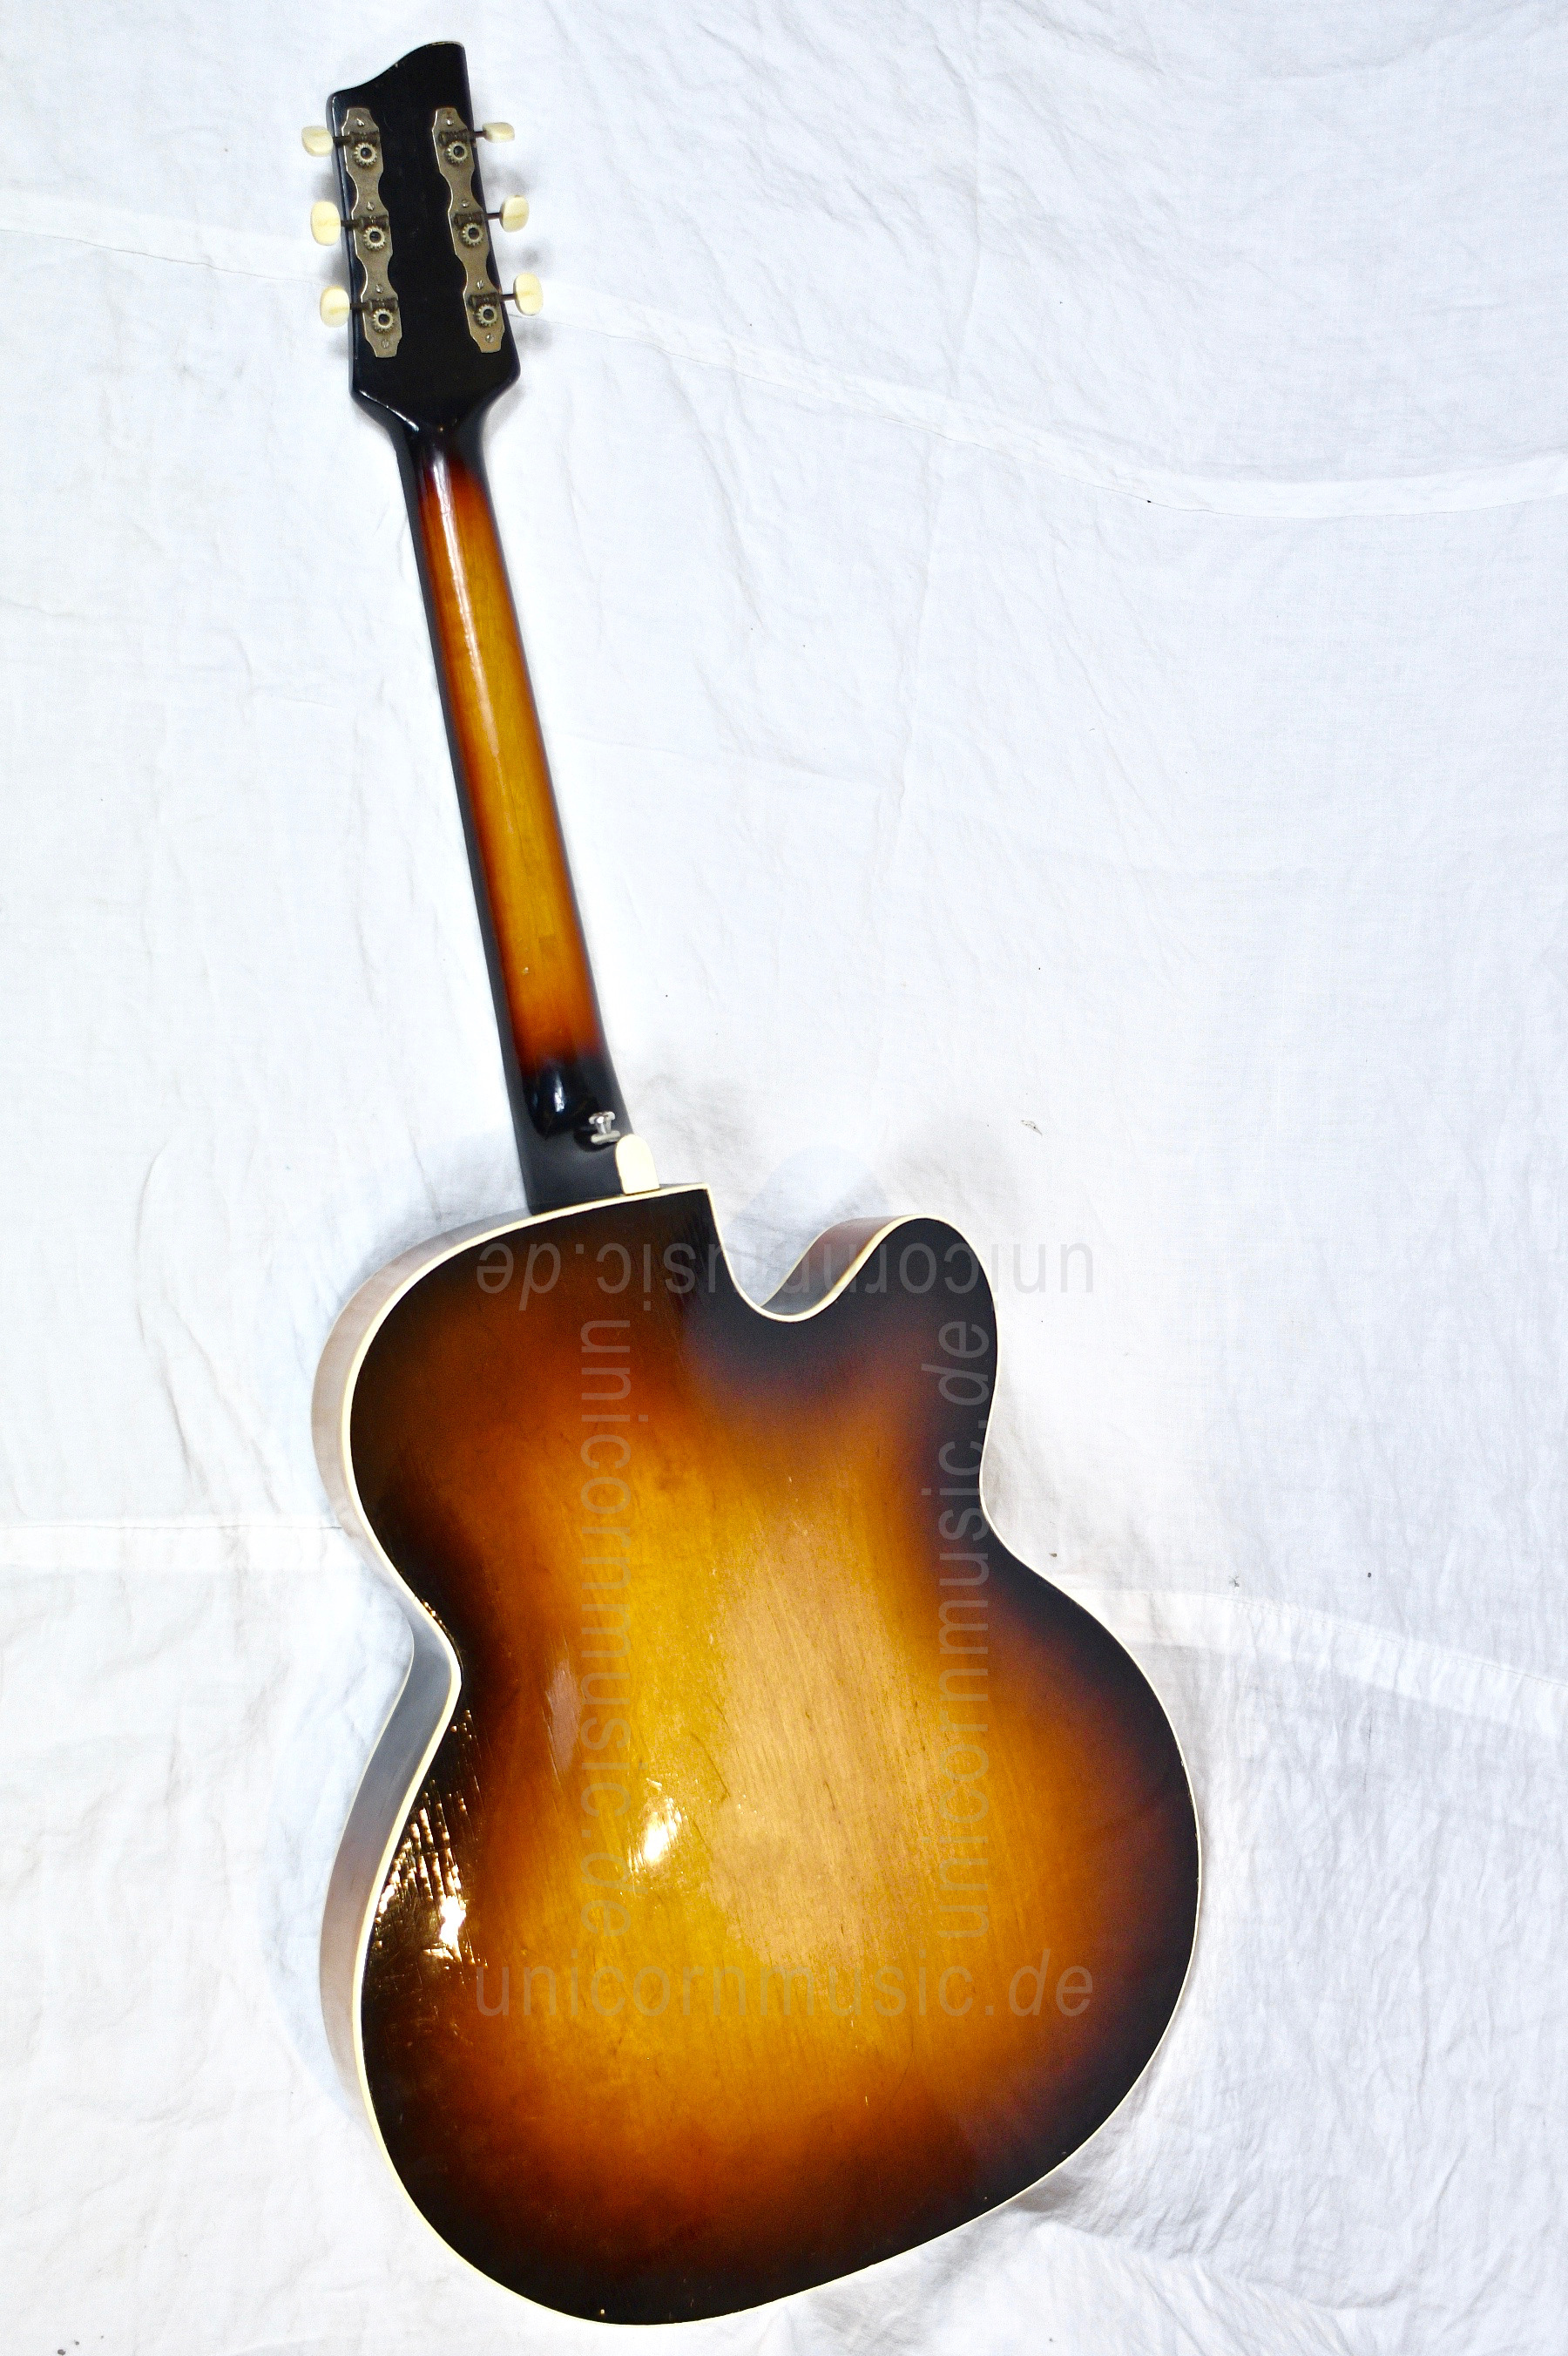 to article description / price 115 - Voss Archtop